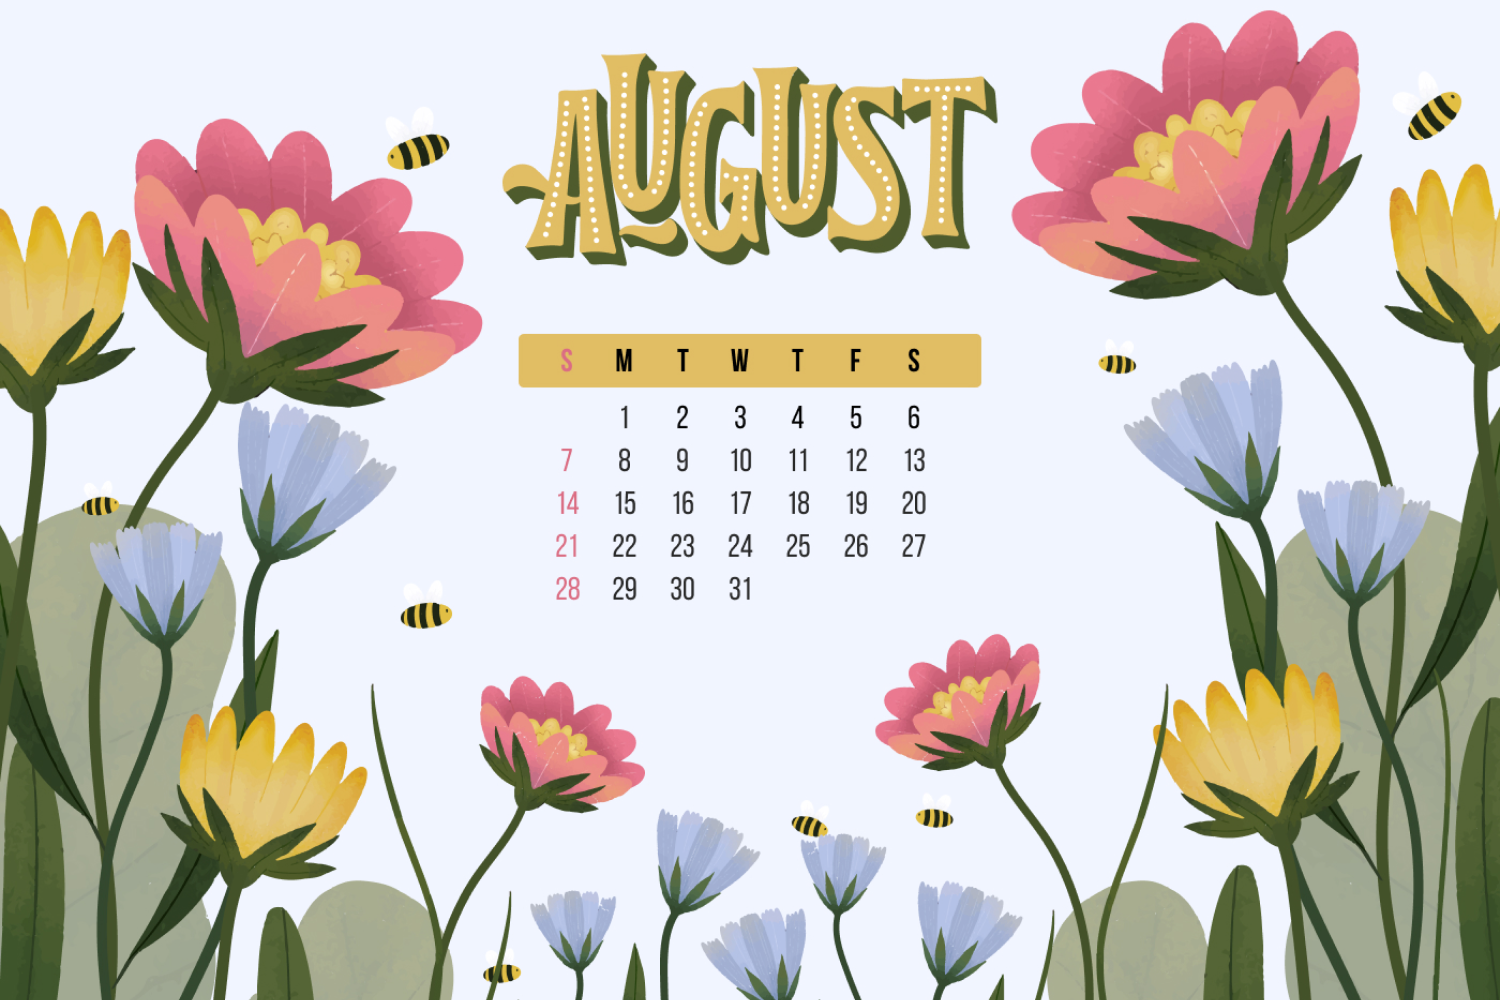 Calendar for august with painted wildflowers.